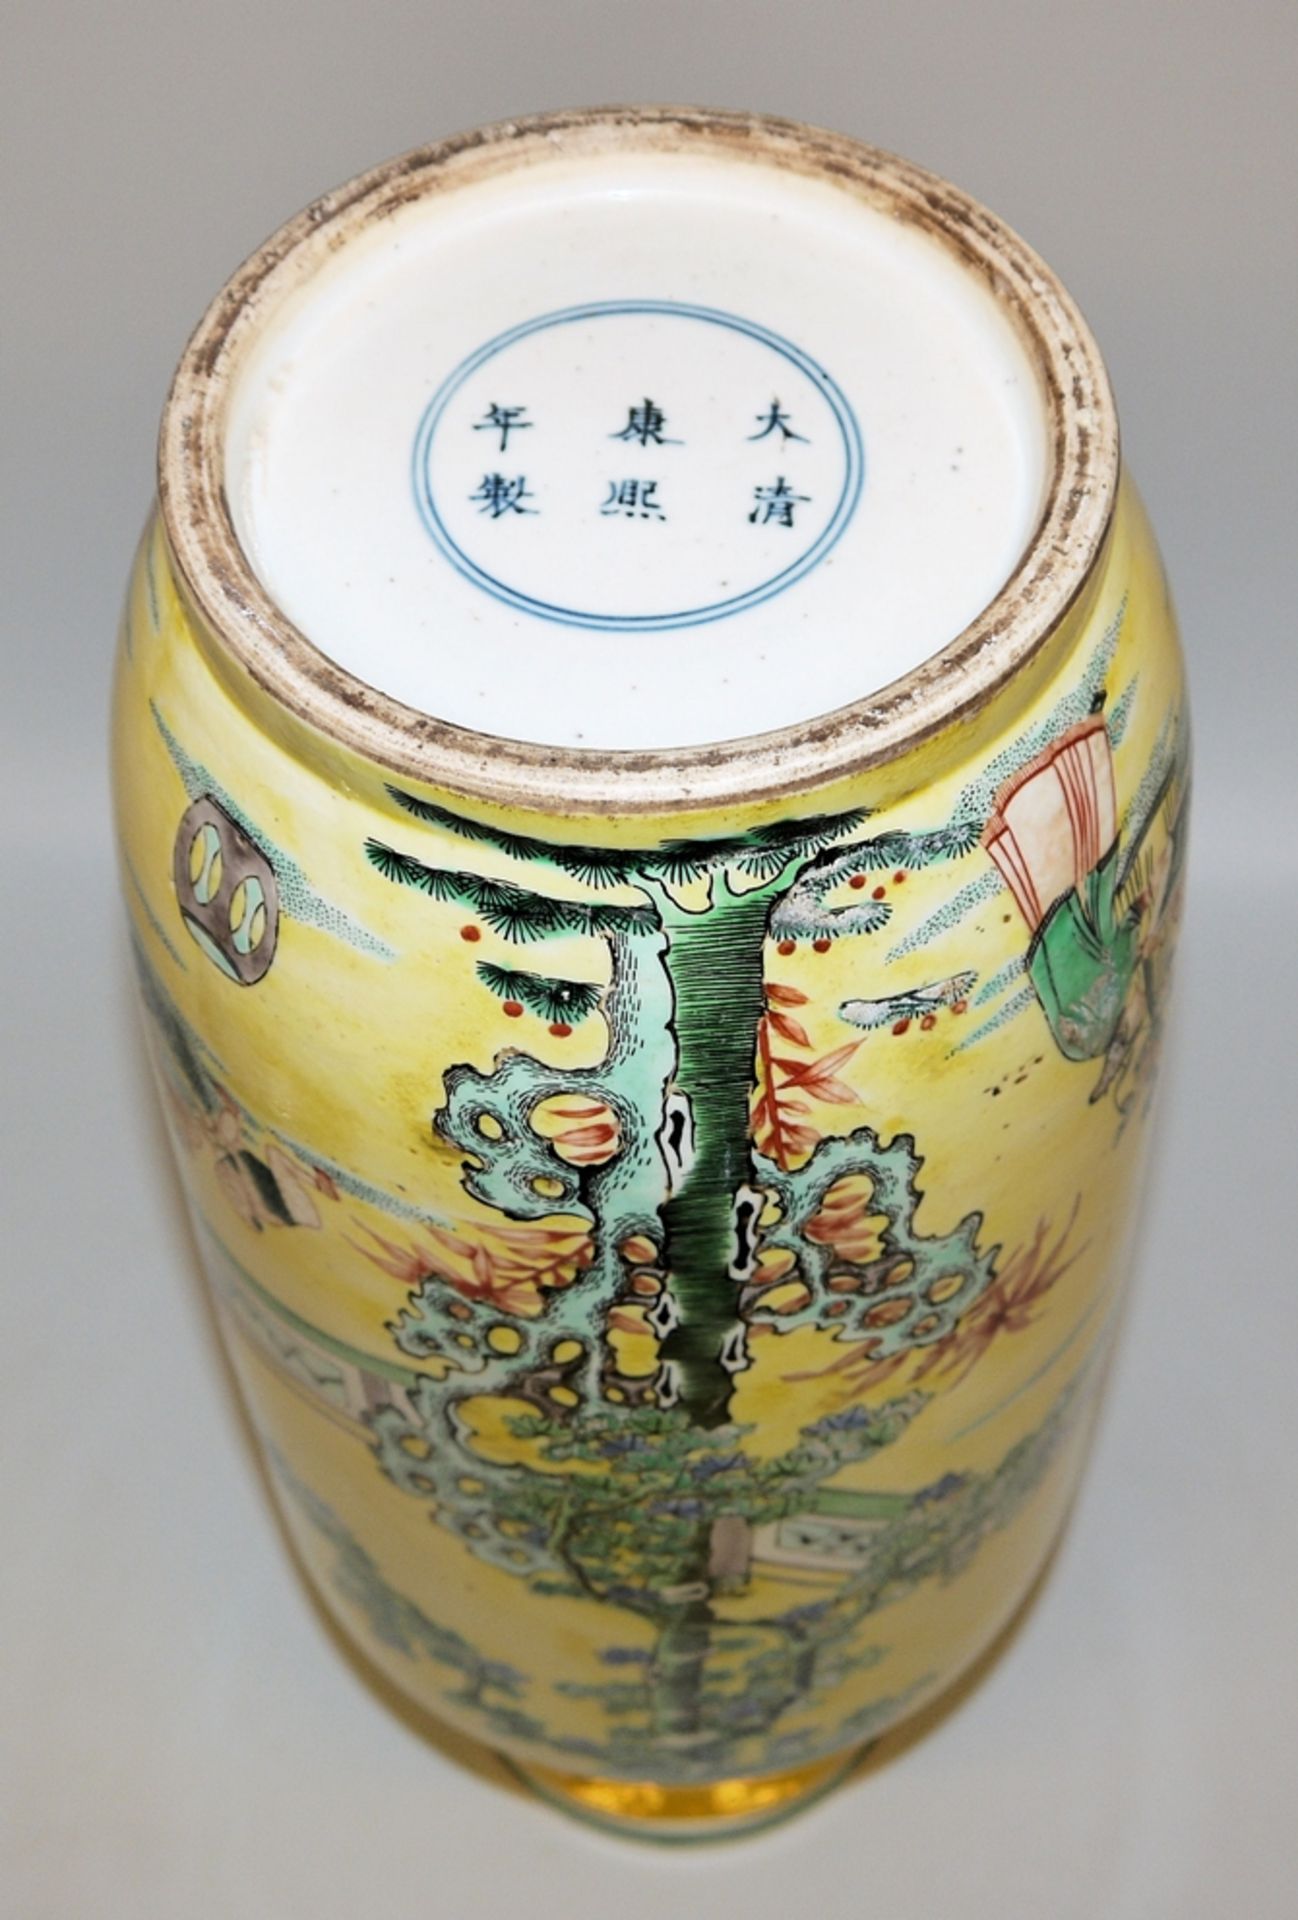 Large rouleau vase with family scenes in famille jaune, late Qing period, China c. 1900 - Image 3 of 3